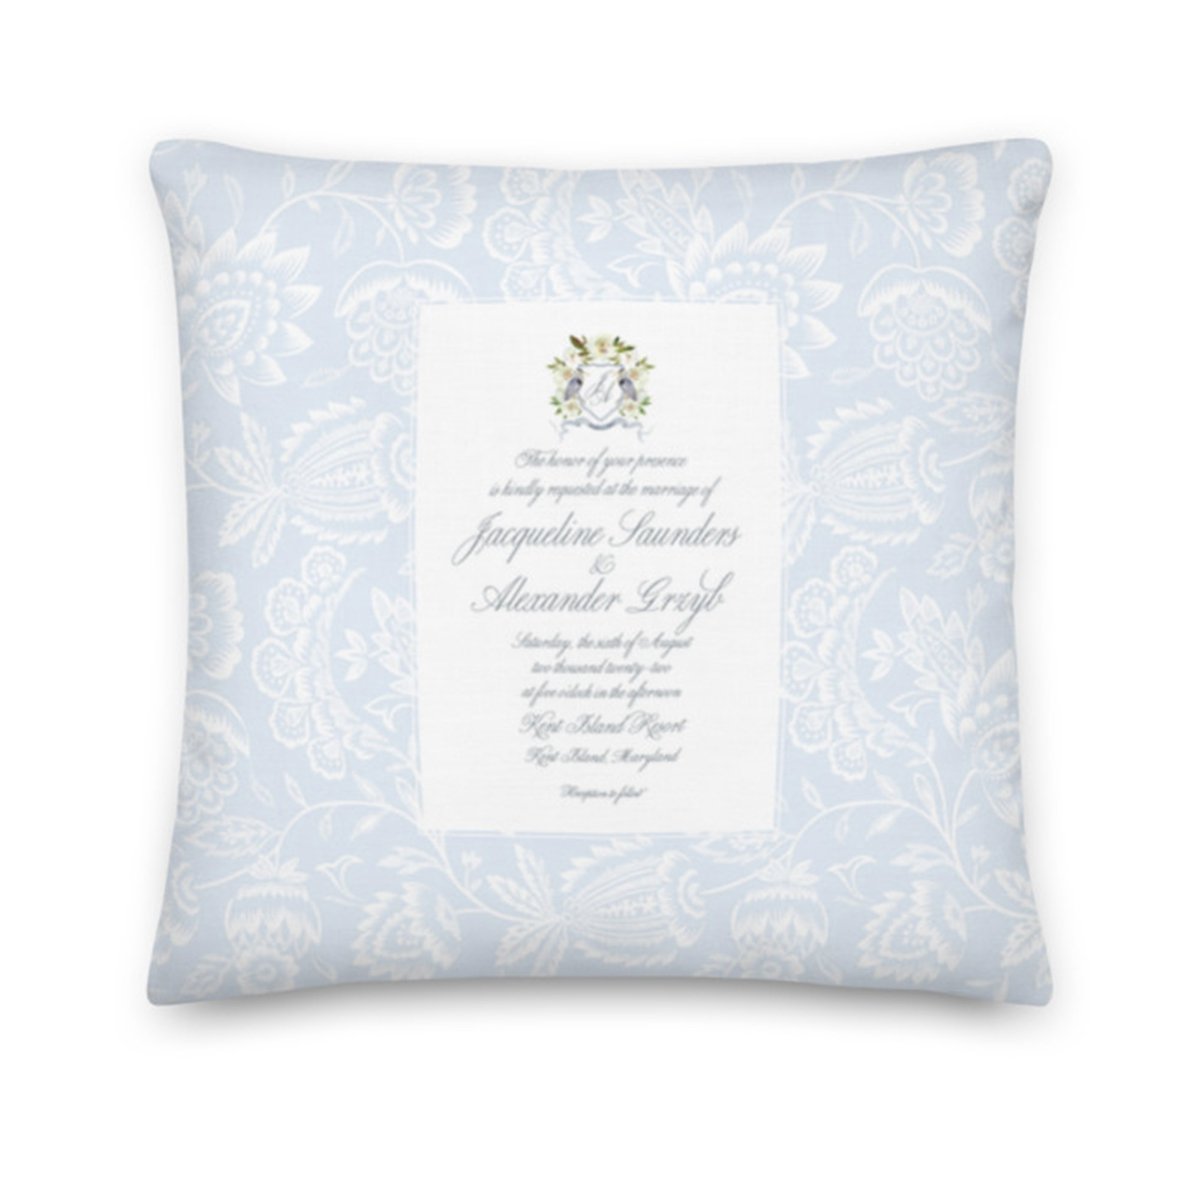 Pillow printed with wedding invitation design